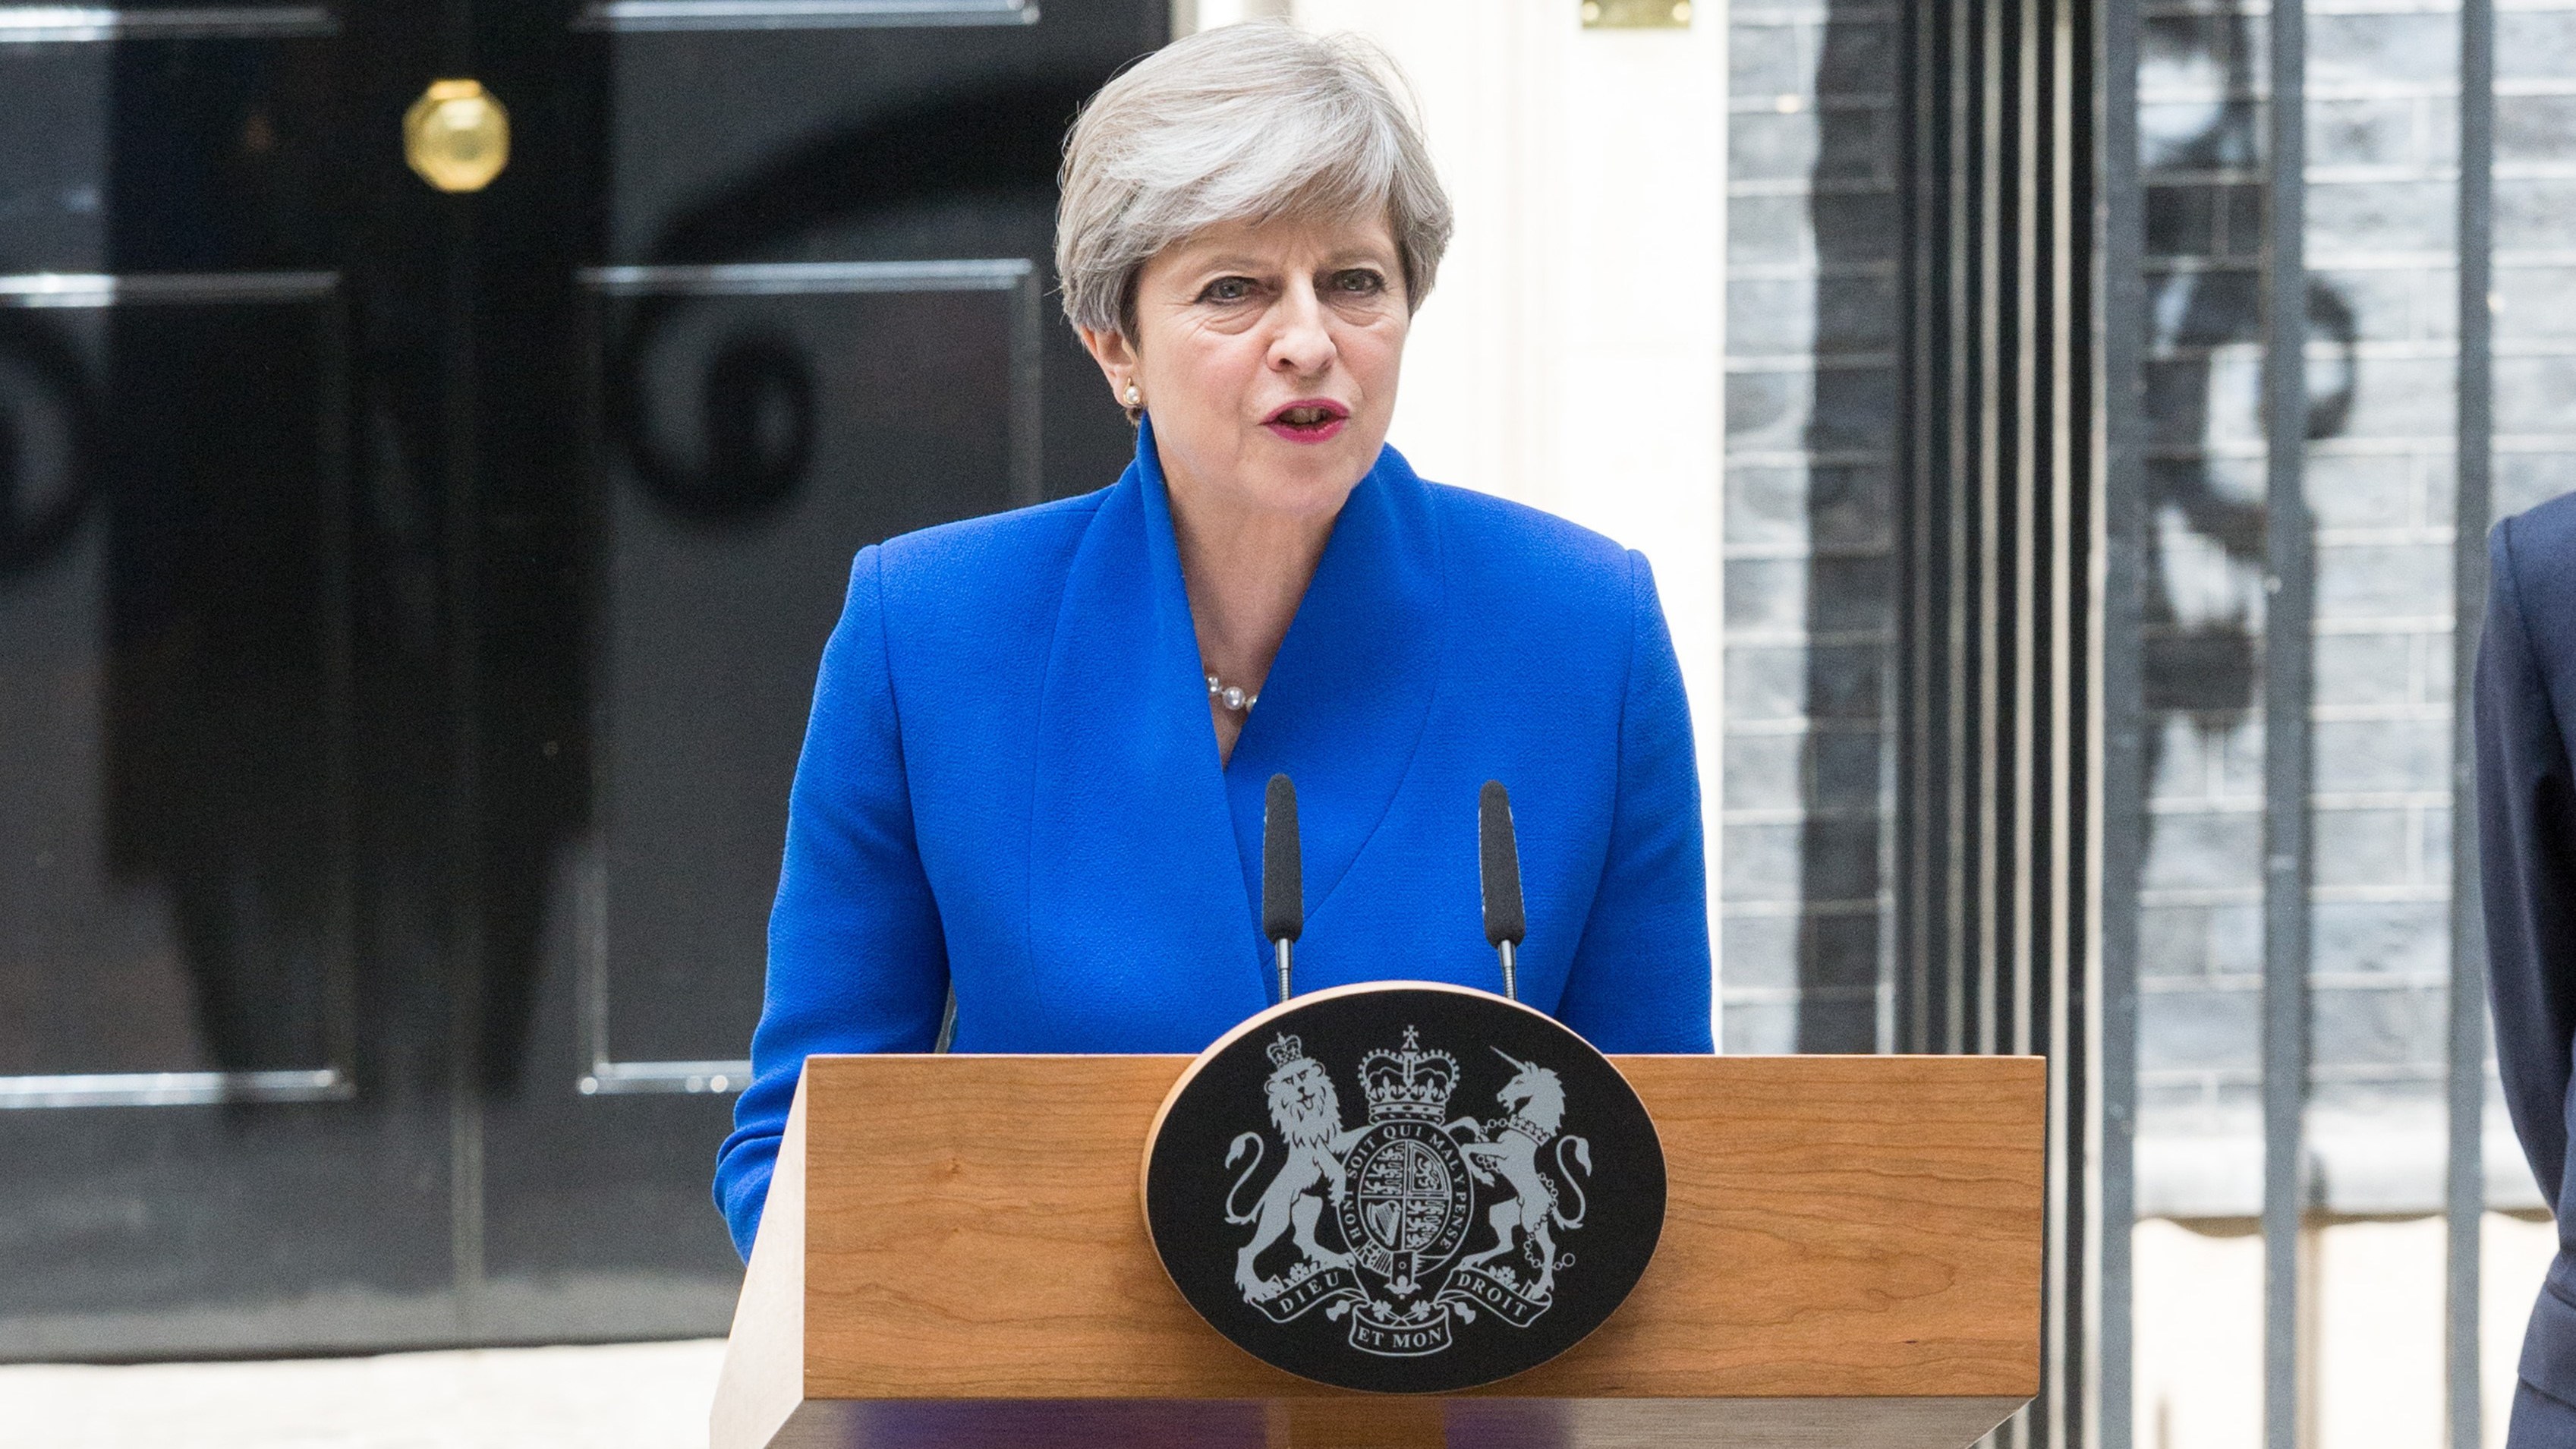 May’s government was fatally weakened after she called a snap election in 2017